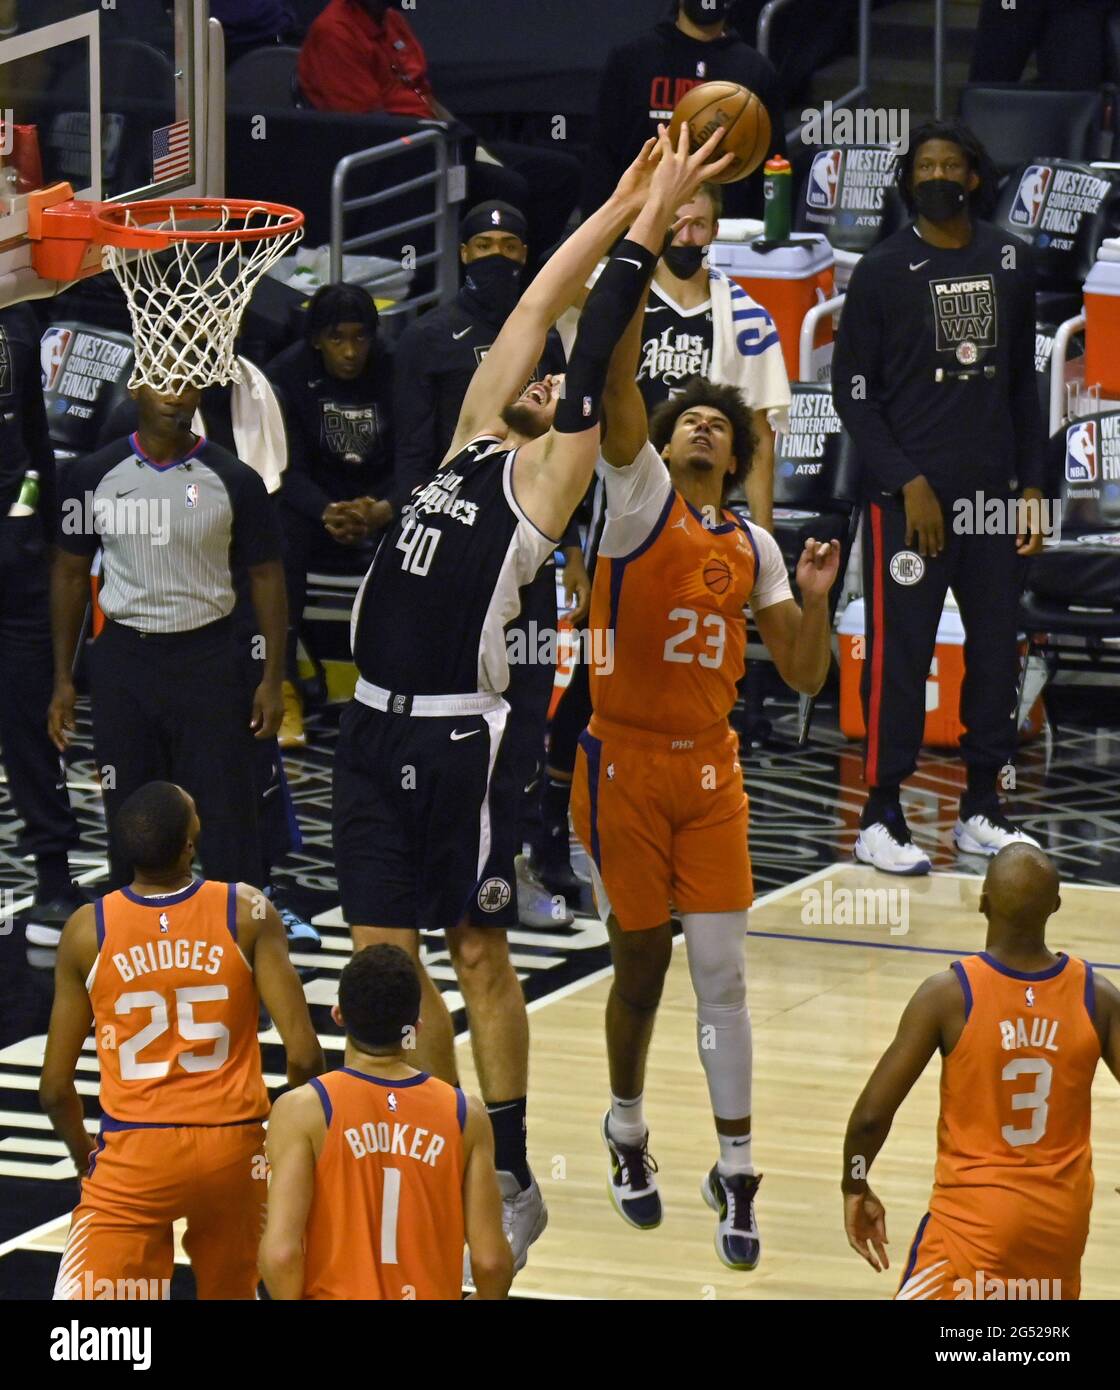 https://c8.alamy.com/comp/2G529RK/los-angeles-usa-june-24-2021-los-angeles-united-states-25th-june-2021-phoenix-suns-forward-cameron-johnson-23-blocks-the-shot-of-los-angeles-clippers-center-ivica-zubac-during-the-fourth-quarter-in-game-3-of-their-best-of-seven-western-conference-finals-matchup-at-staples-center-in-los-angeles-on-thursday-june-24-2021-after-dropping-the-opening-two-games-in-phoenix-the-clippers-took-game-3-106-92-by-staying-in-control-throughout-photo-by-jim-ruymenupi-credit-upialamy-live-news-2G529RK.jpg